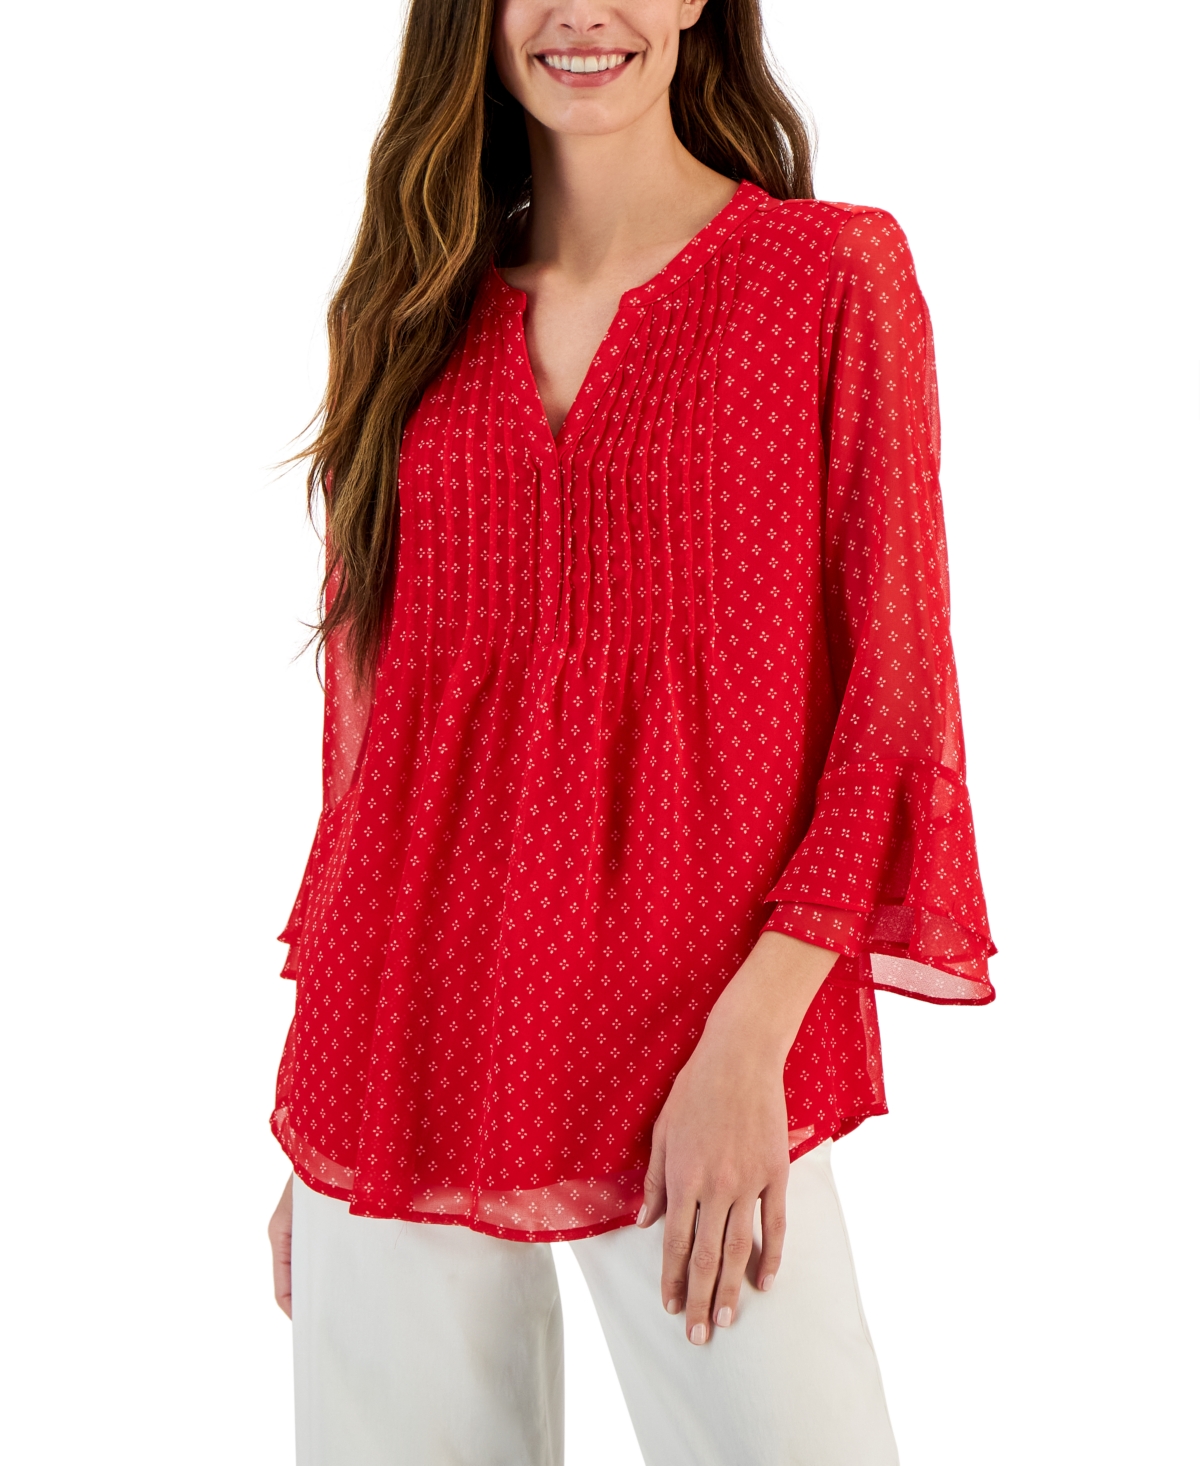 CHARTER CLUB PETITE PRINTED PINTUCK TOP, CREATED FOR MACY'S